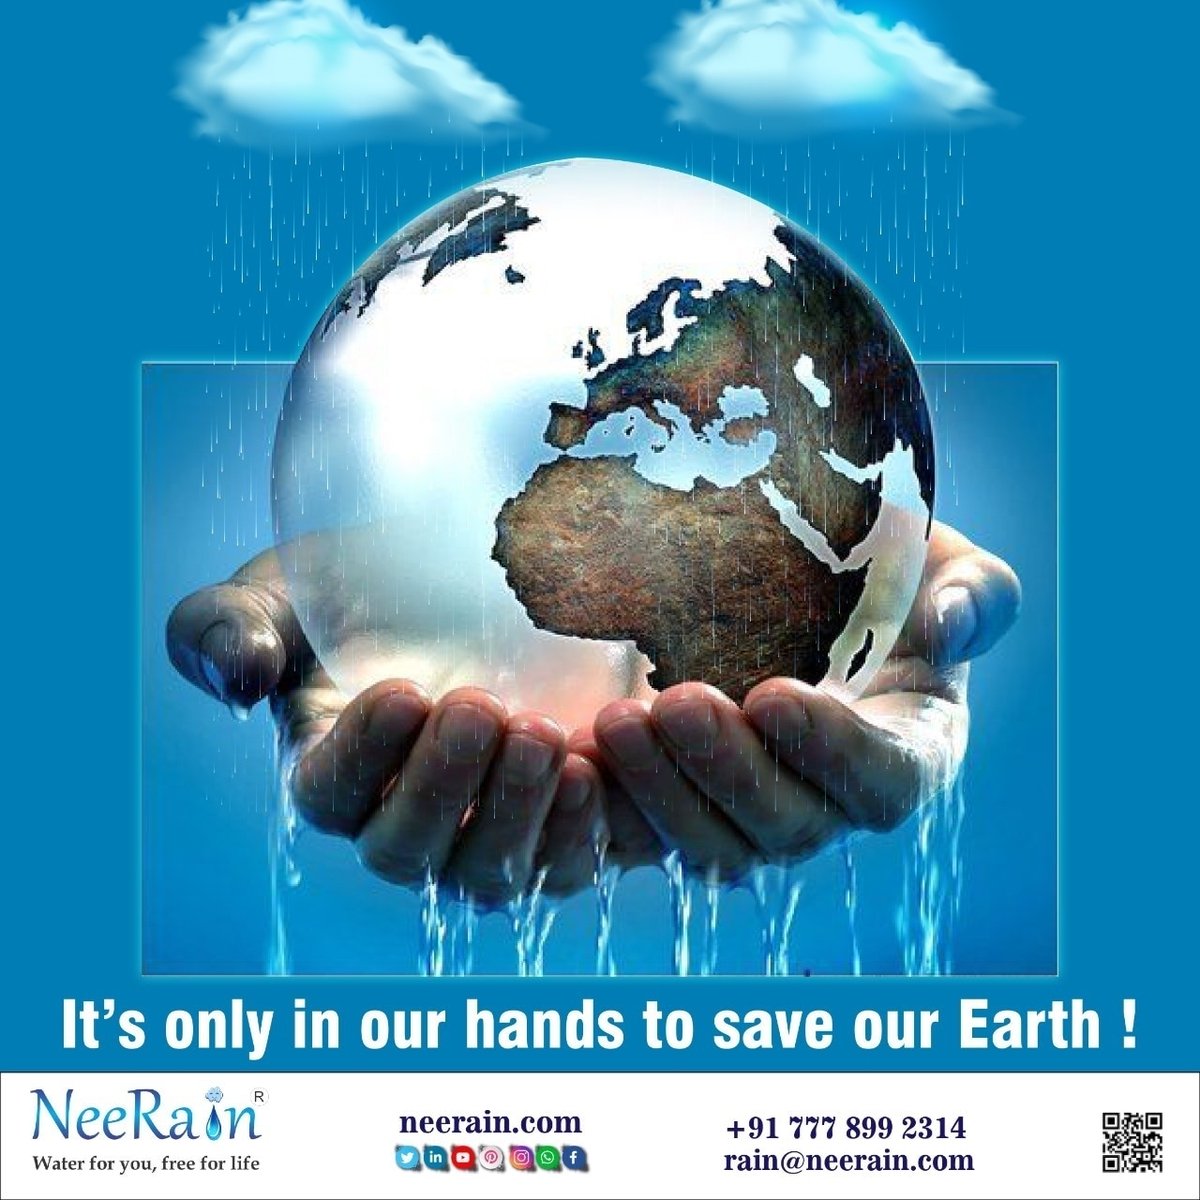 It's only in our hands to save our Earth !! 

#rain #RechargeWater #RechargeRain #Water #WaterForLife #waterharvesting #WaterConservation #savewatersavelife #Sustainability #ecofriendly #greenbuilding #GroundWater #Neerain #NeeRainFilter #rainwater #WaterInnovation #watermanageme